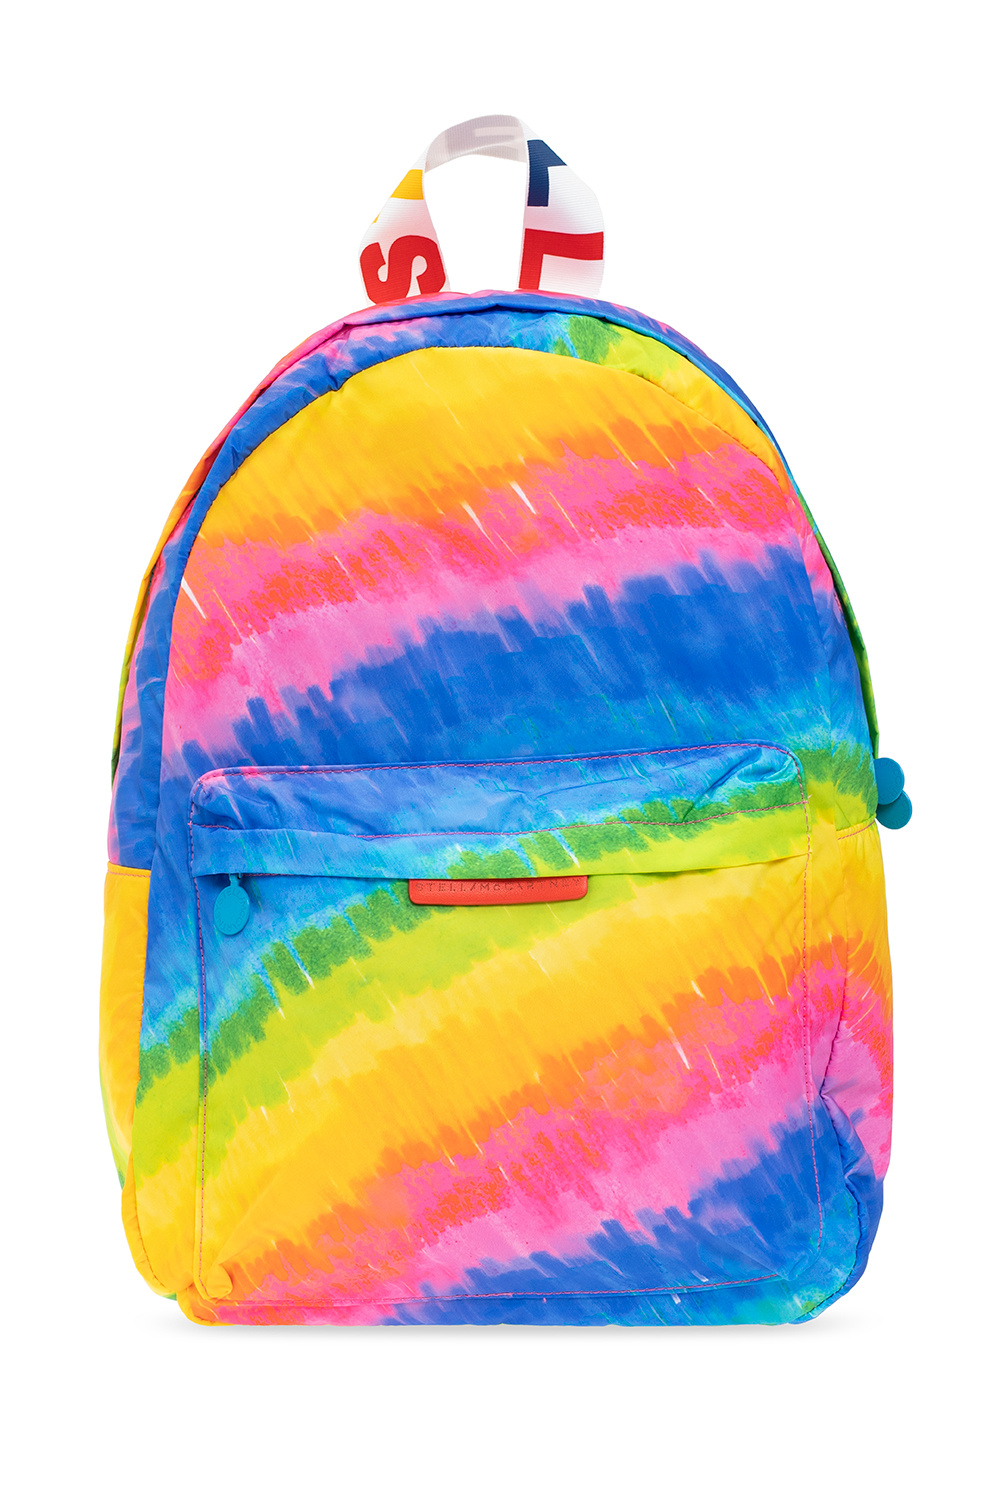 stella pants McCartney Kids Backpack in recycled fabric